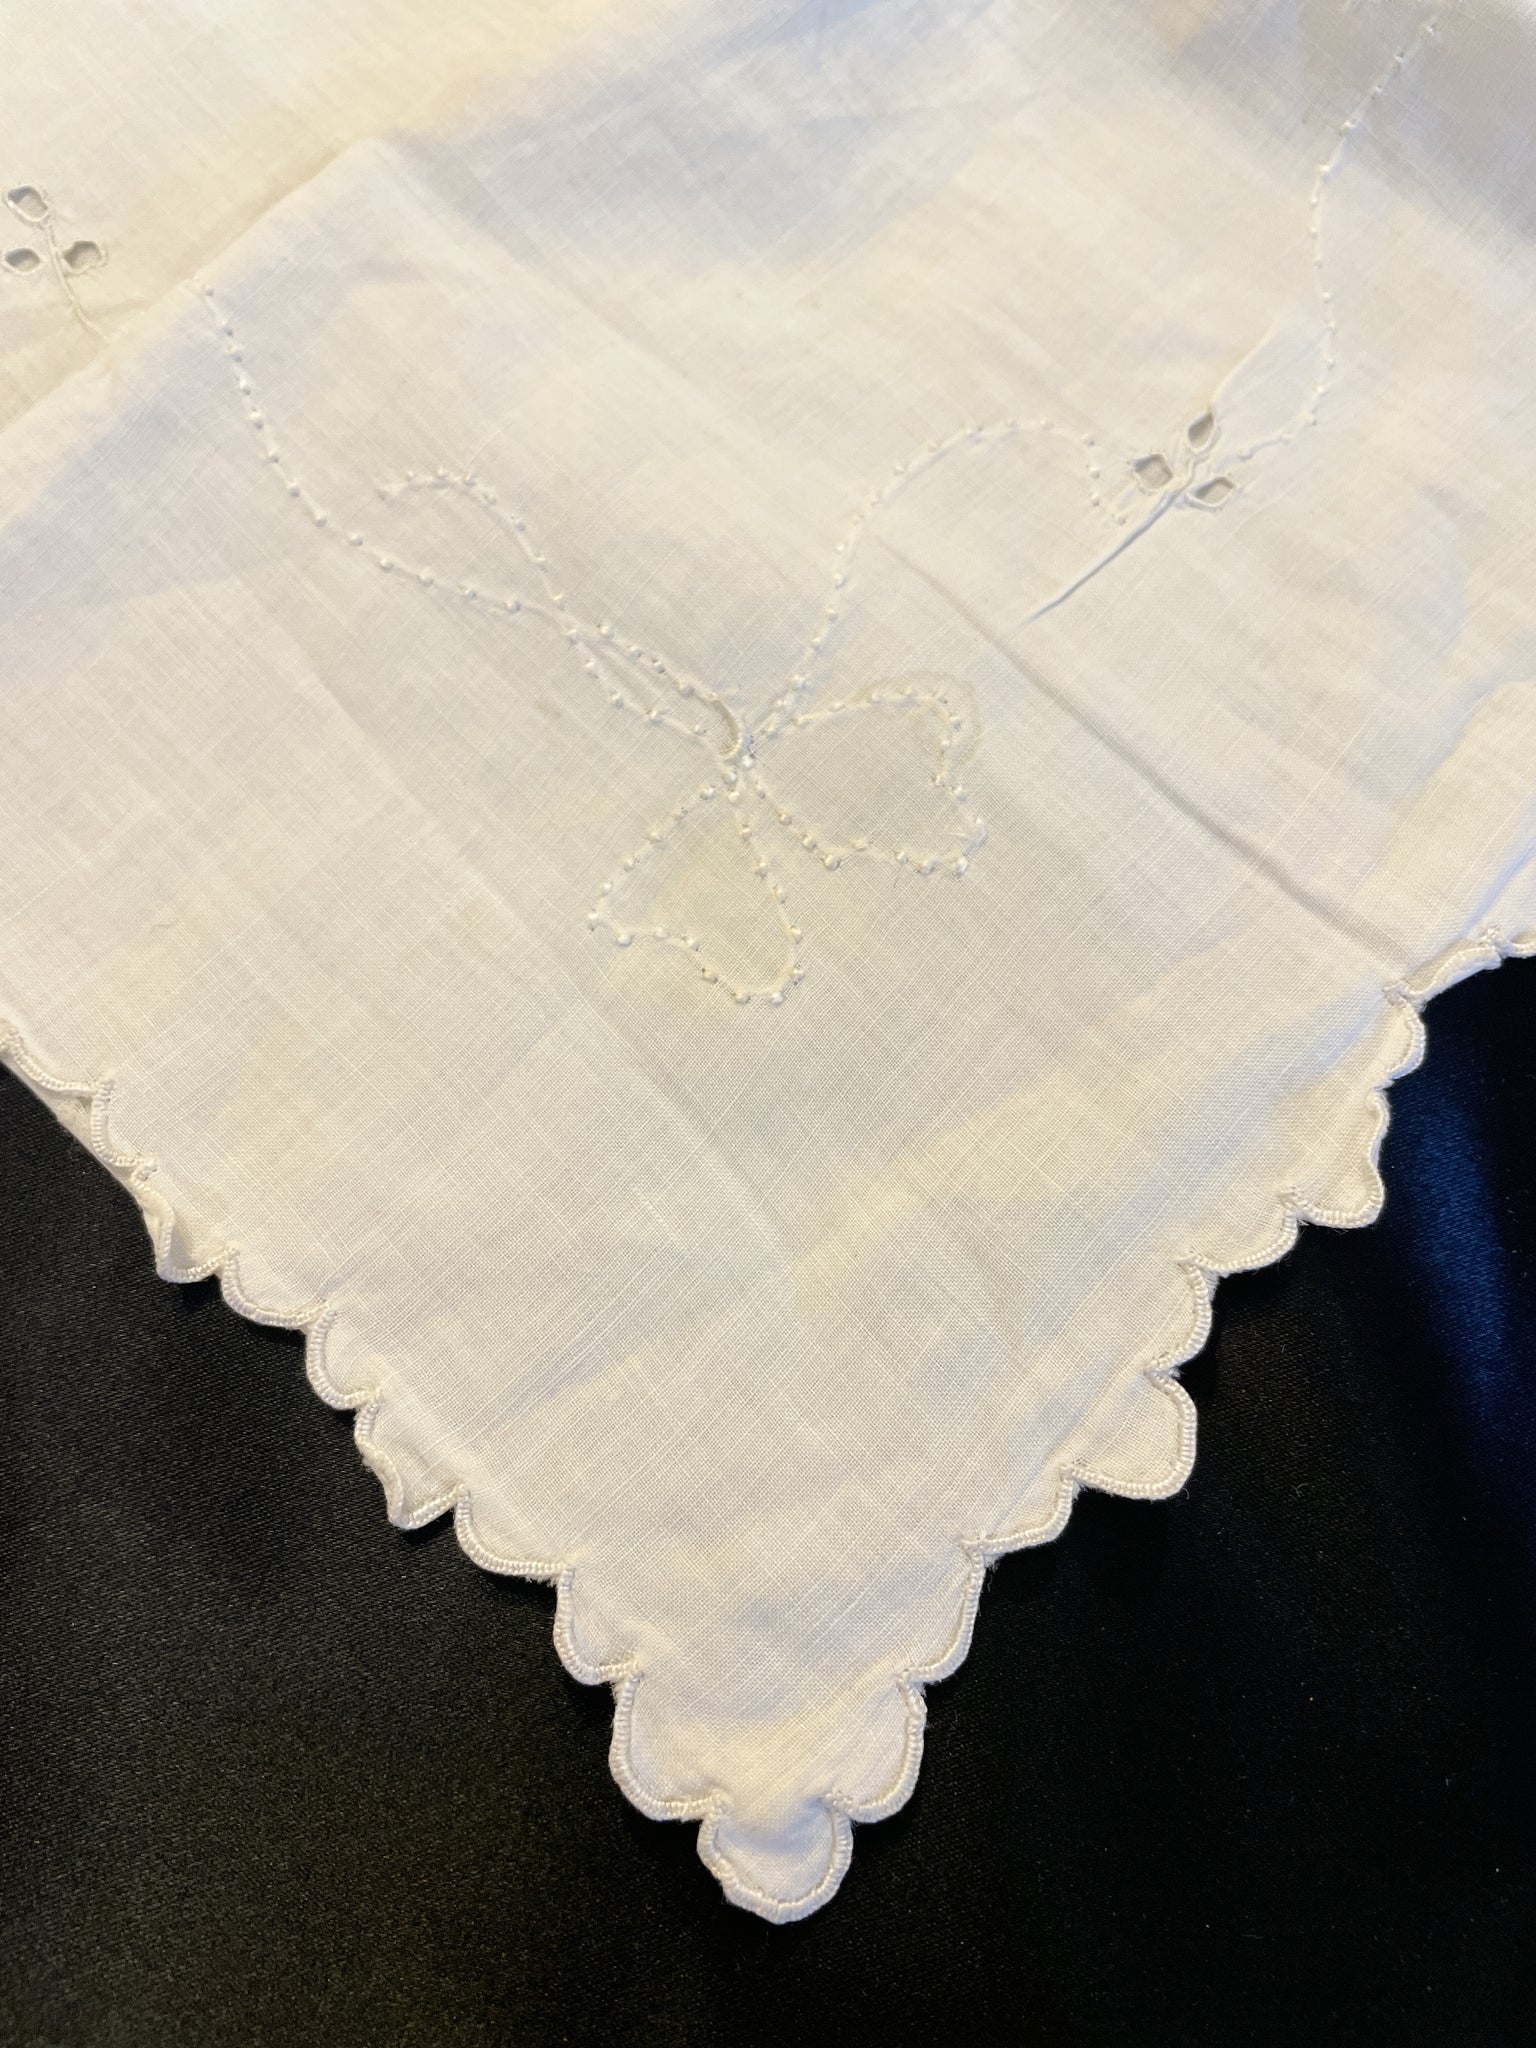 Pillow Sham Vintage Child's or Doll Size - White with Embroidered Scalloped Edges